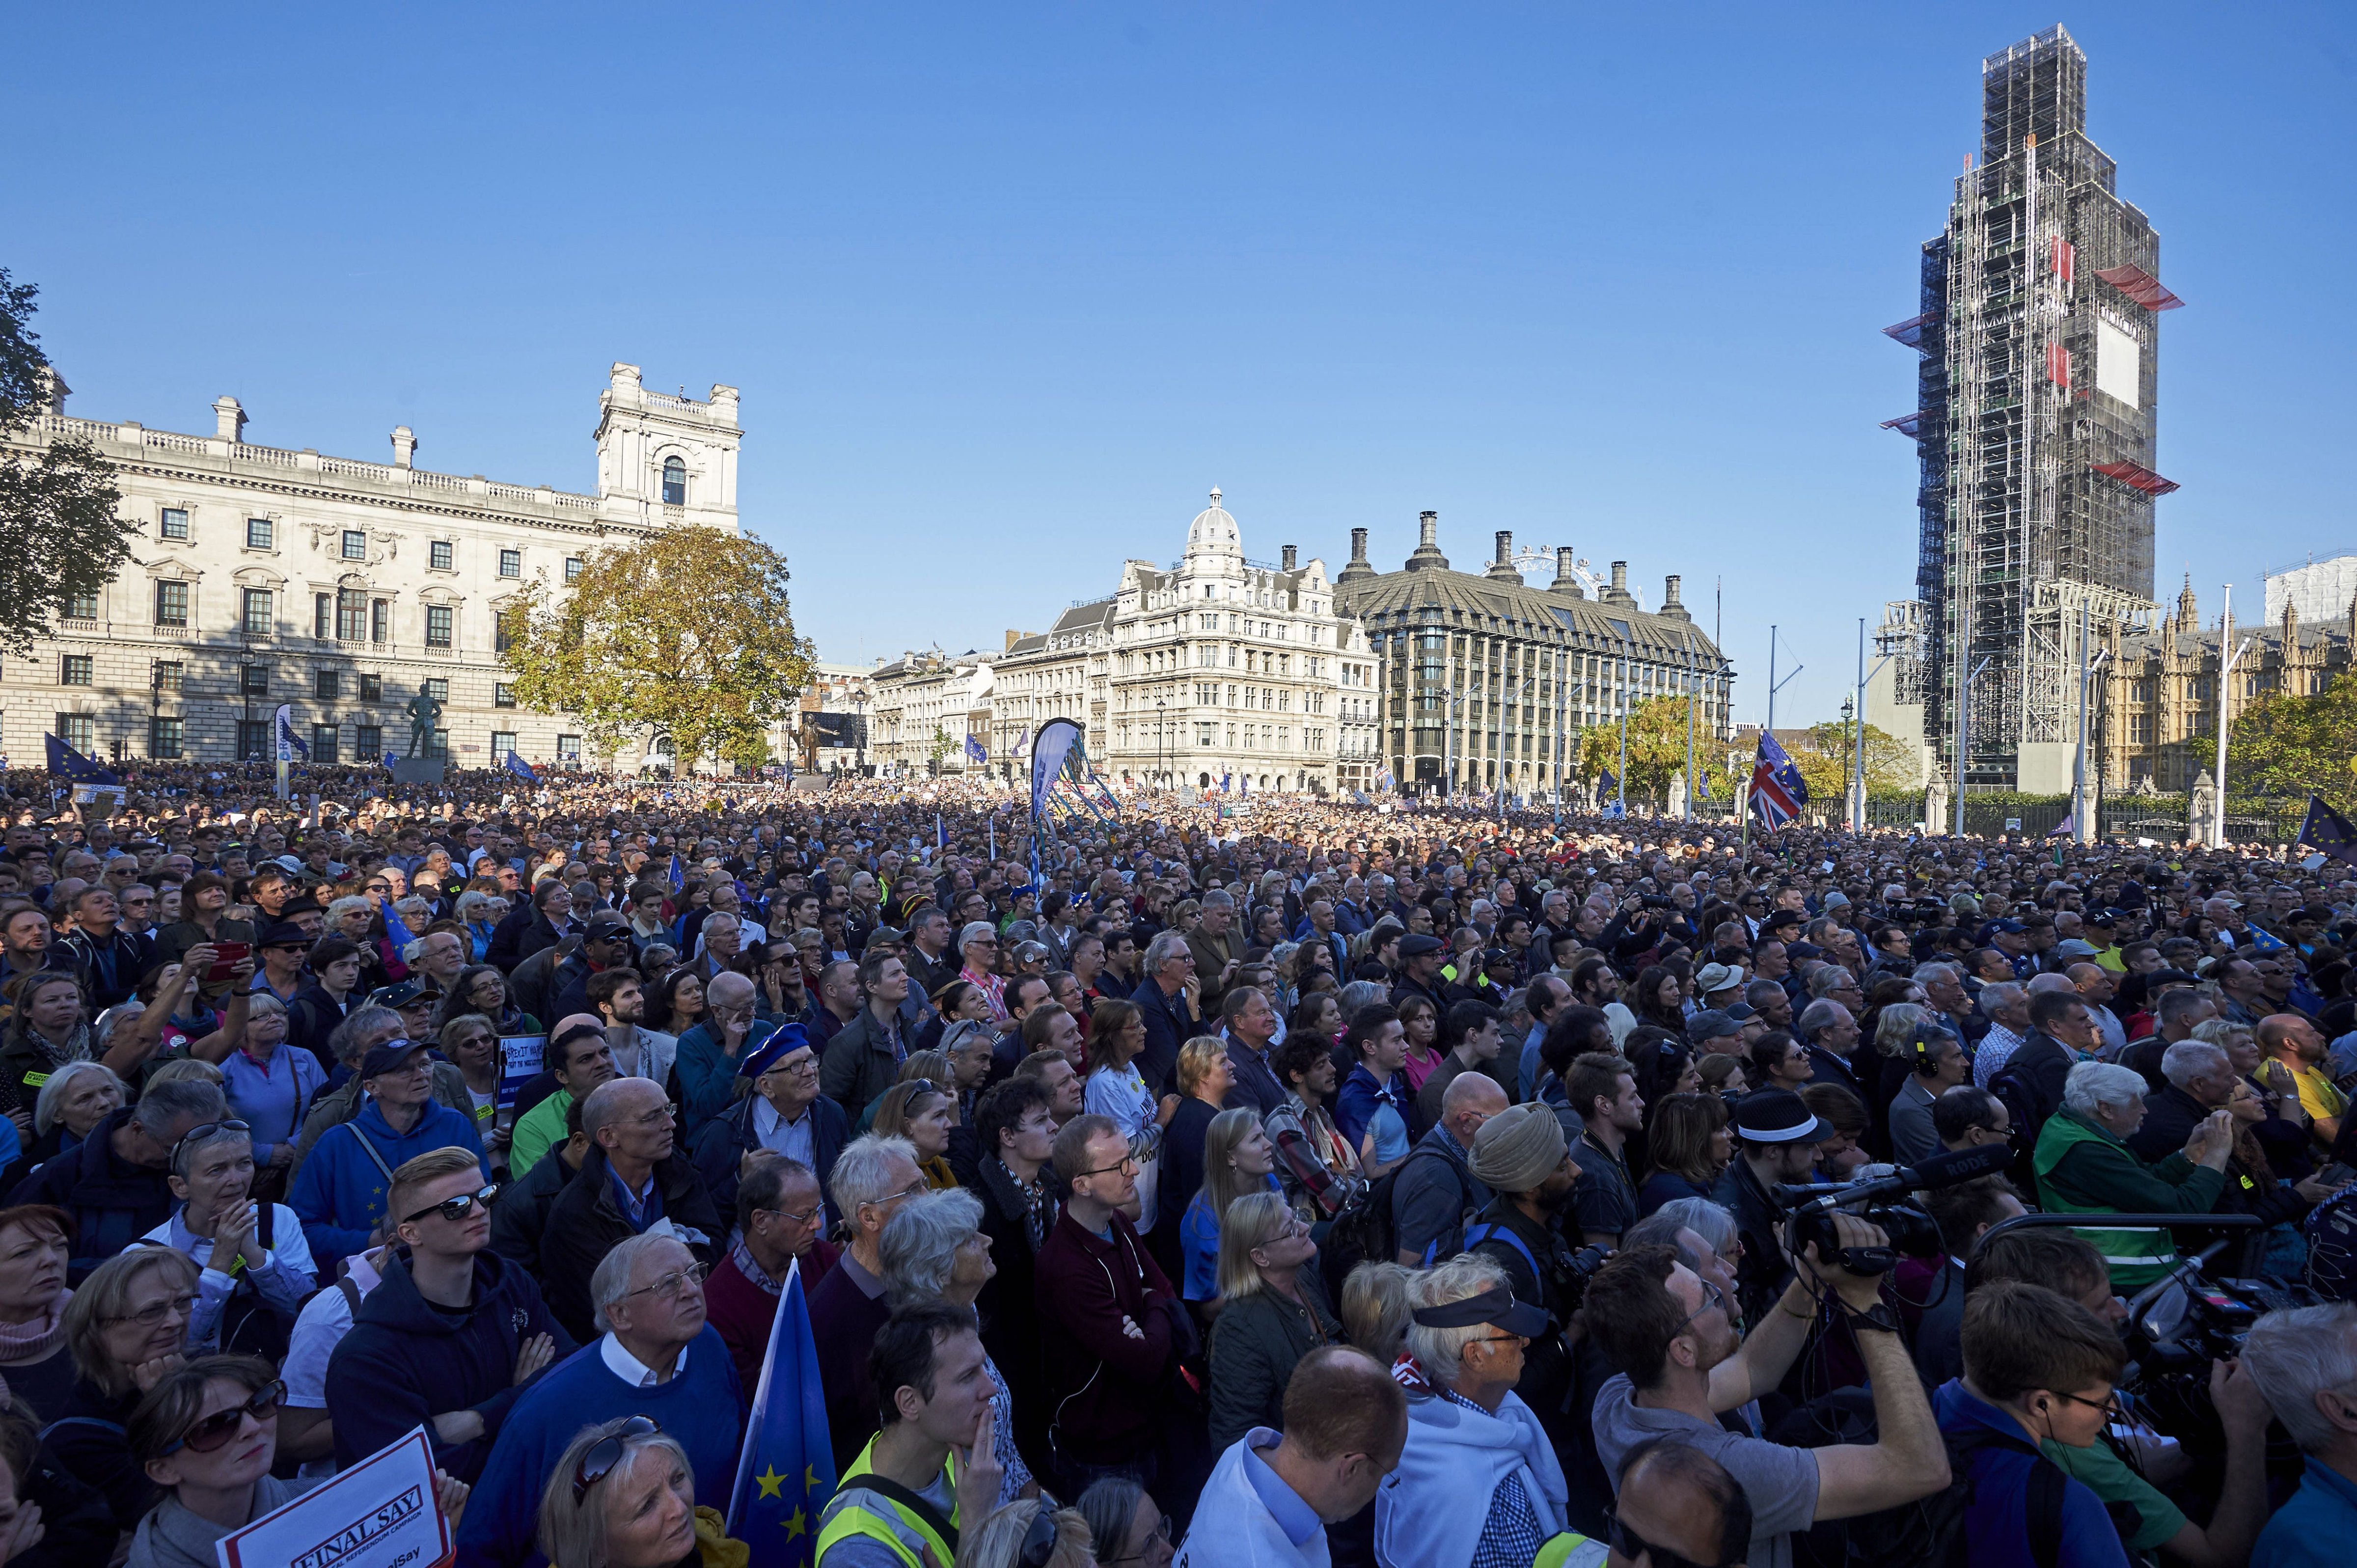 OCT. 20: Demonstrators listen to speeches after taking part in the "People's Vote" march. (NIKLAS HALLE'N—AFP/Getty Images)